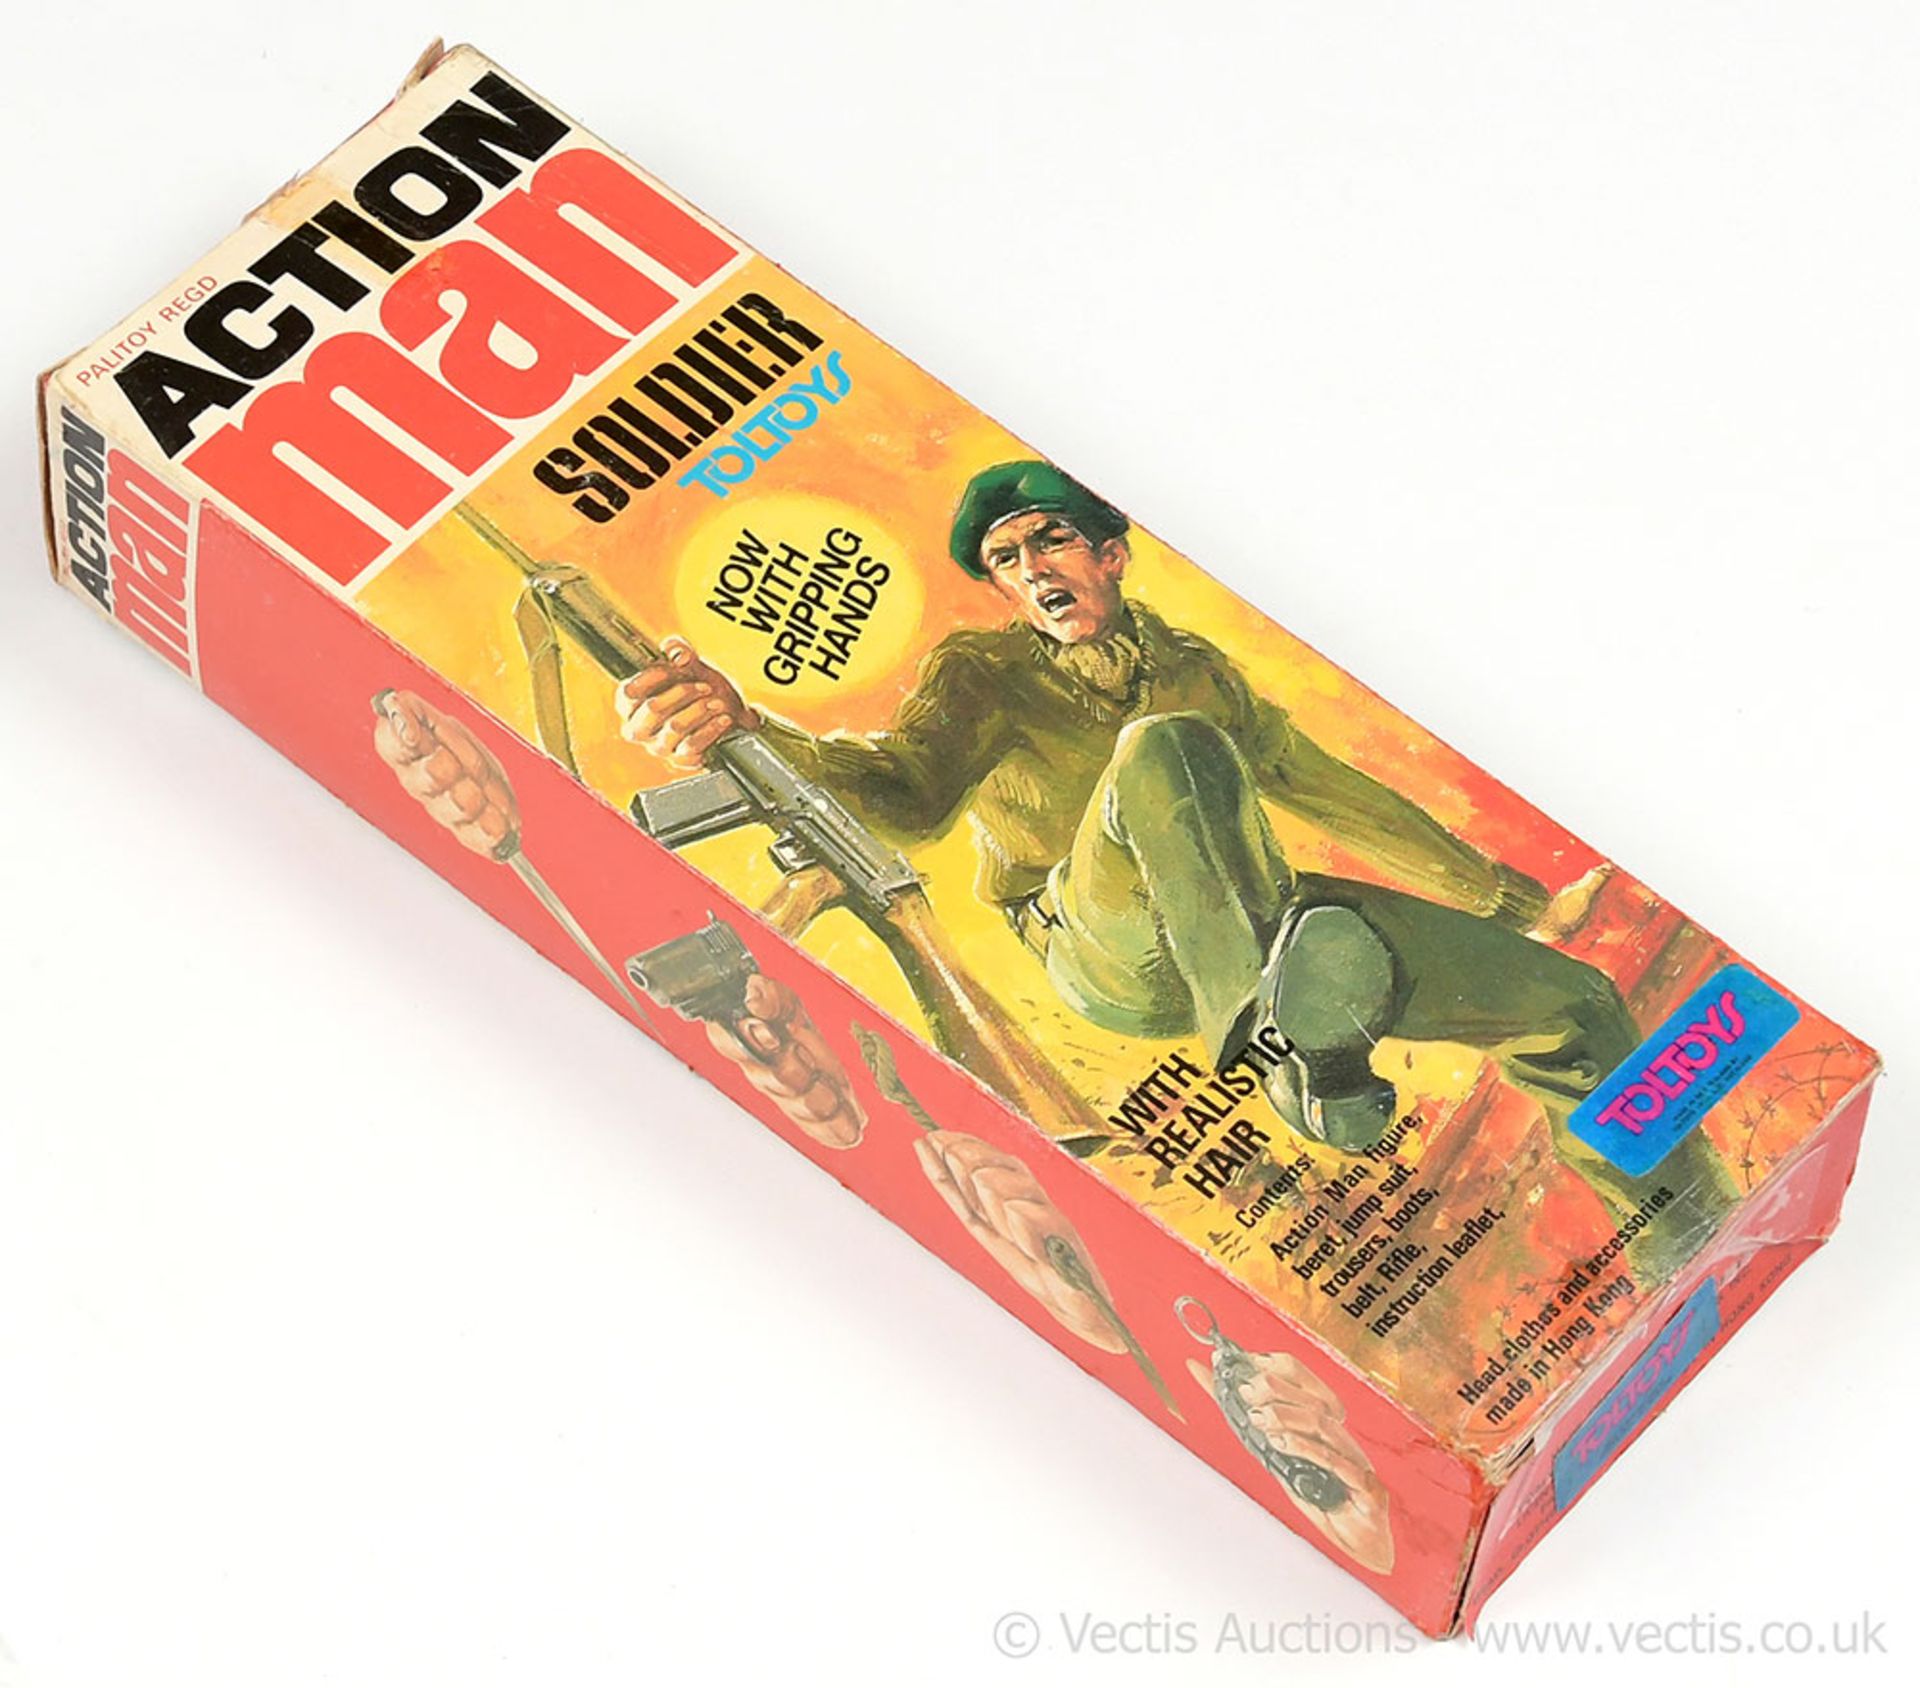 Palitoy Action Man Vintage Soldier Empty Box